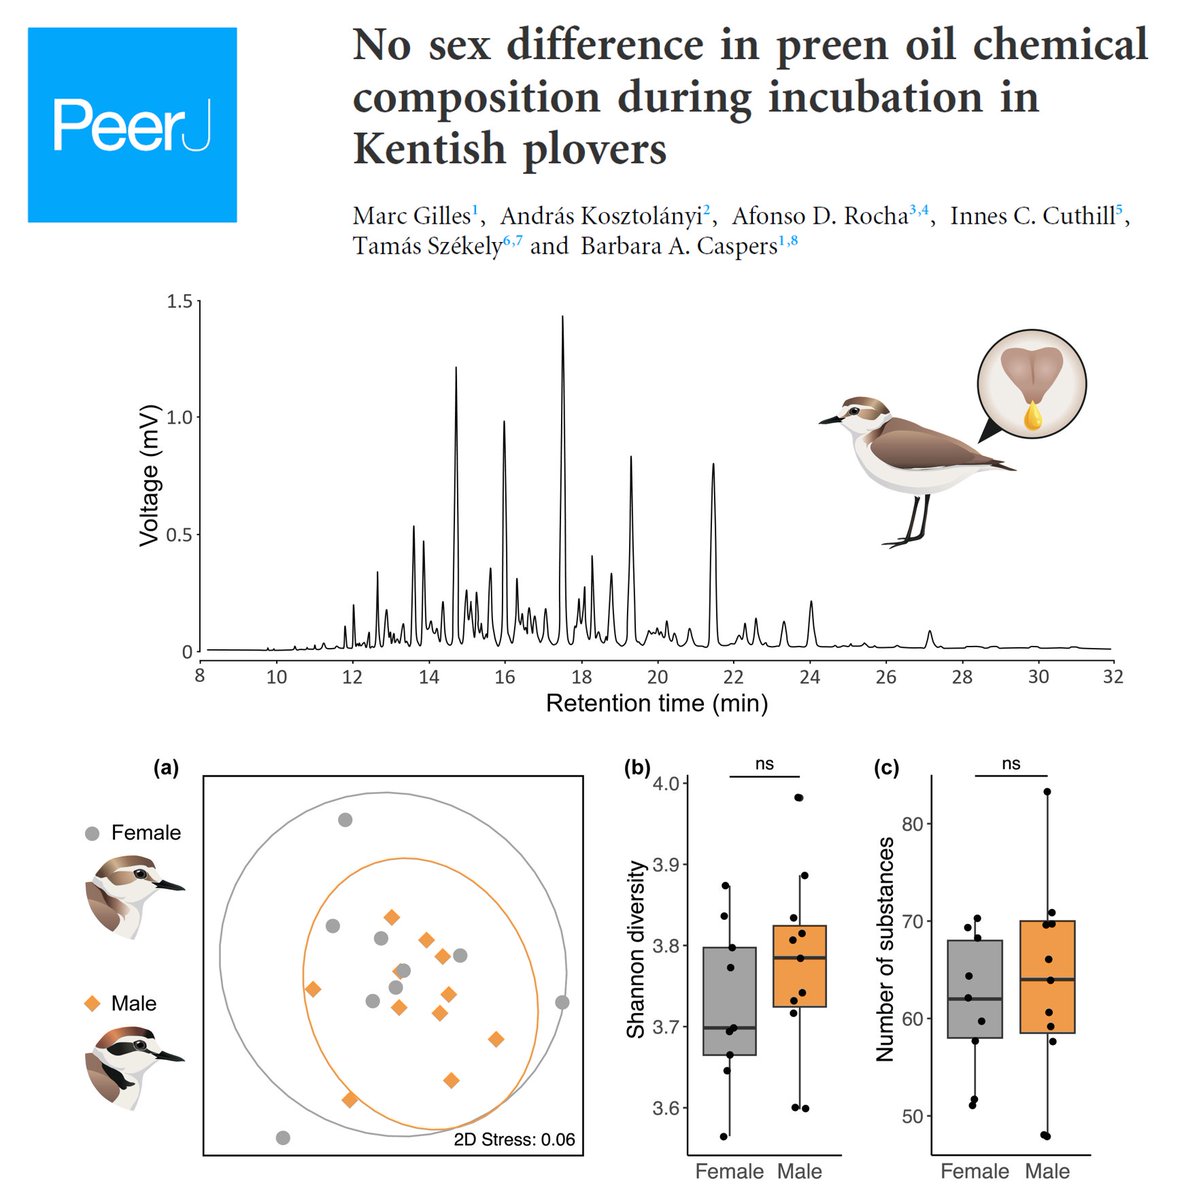 New paper out in @PeerJLife! 👉 peerj.com/articles/17243… Do female and male Kentish plovers differ in their preen oil composition? No, they don’t! Find out more in the thread below (1/7) 🧵 #ornithology #preenoil #birdsmell